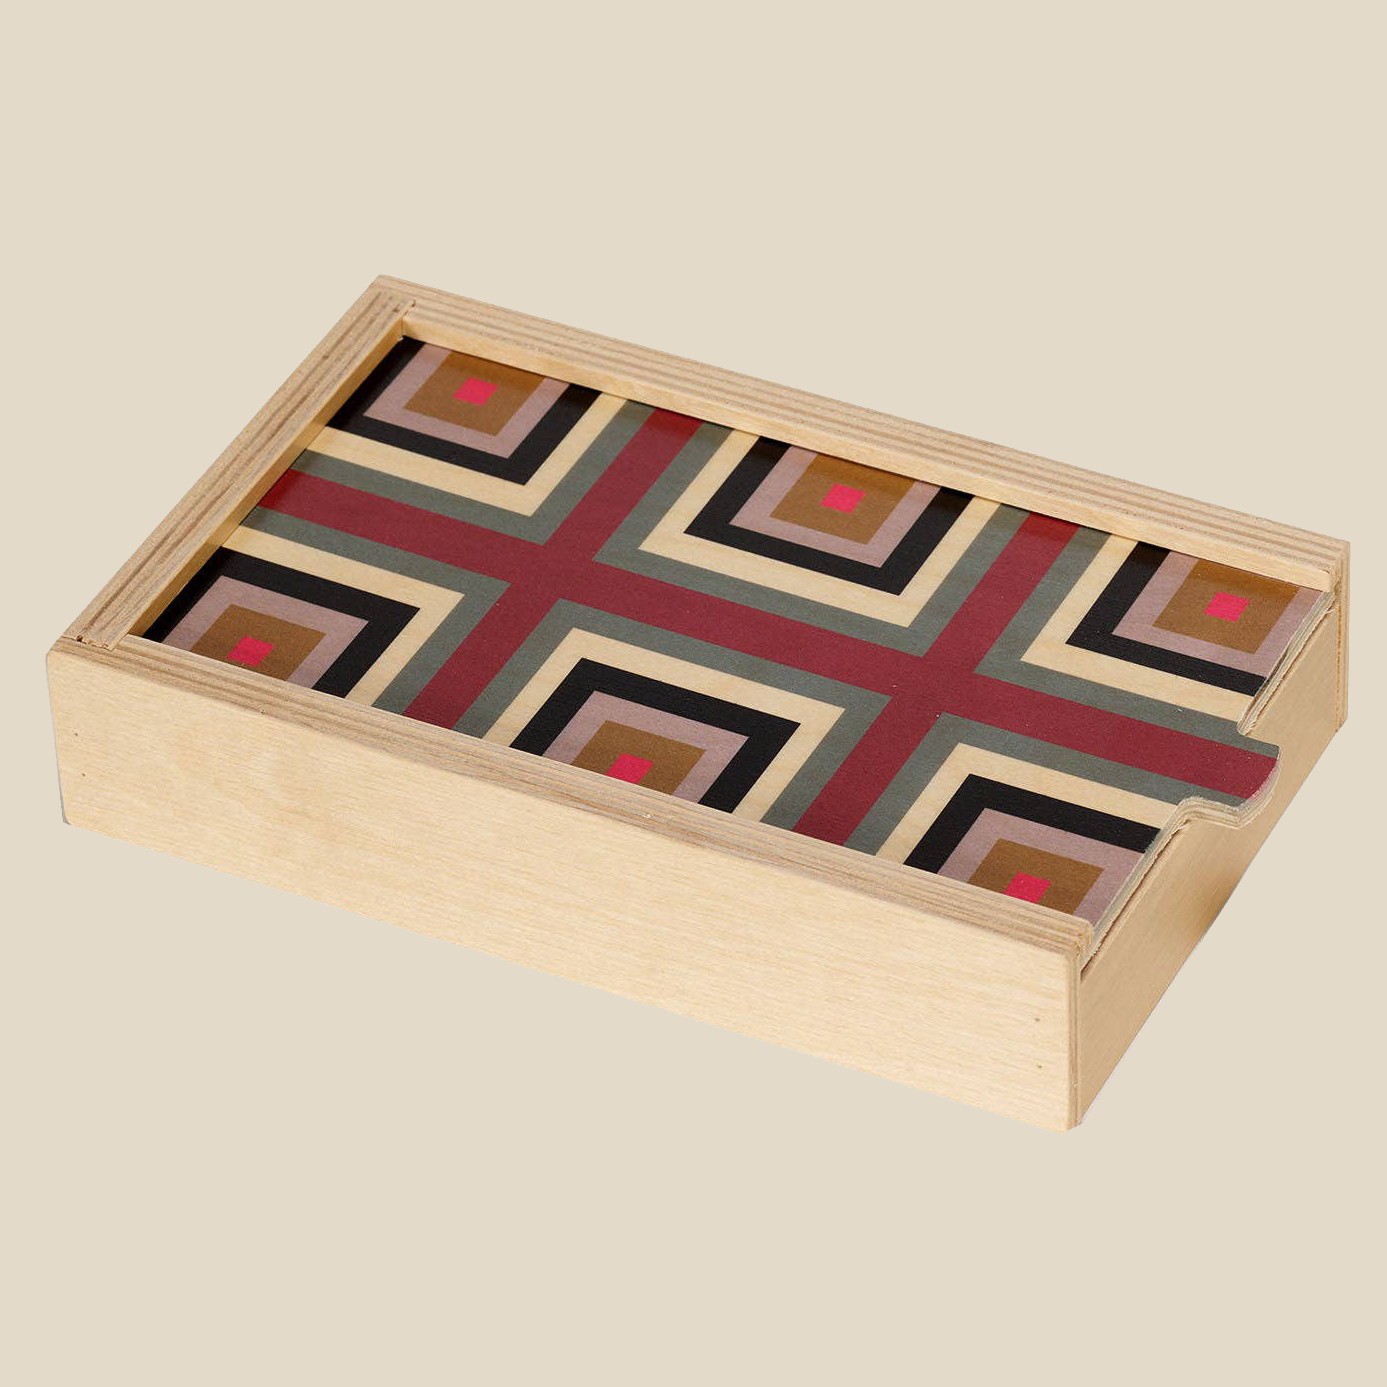 Wolfum Studio Domino Set in “Squaresville Maroon”. The Domino set is closed so you can only see the wooden birch box it comes in.